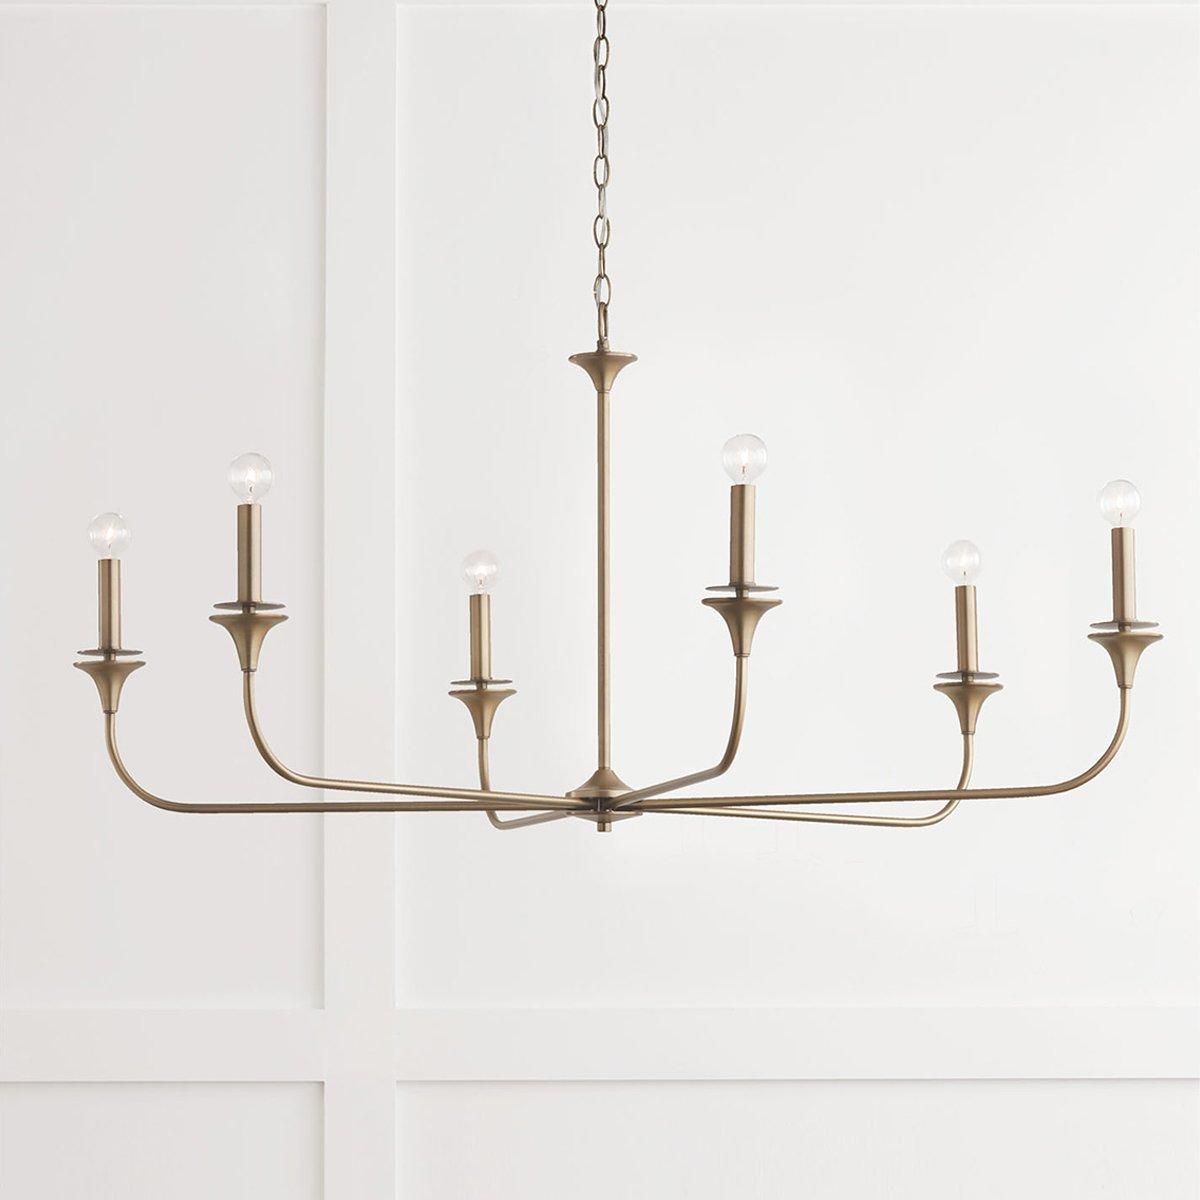 Mayhue Chandelier - 6 Light | Shades of Light